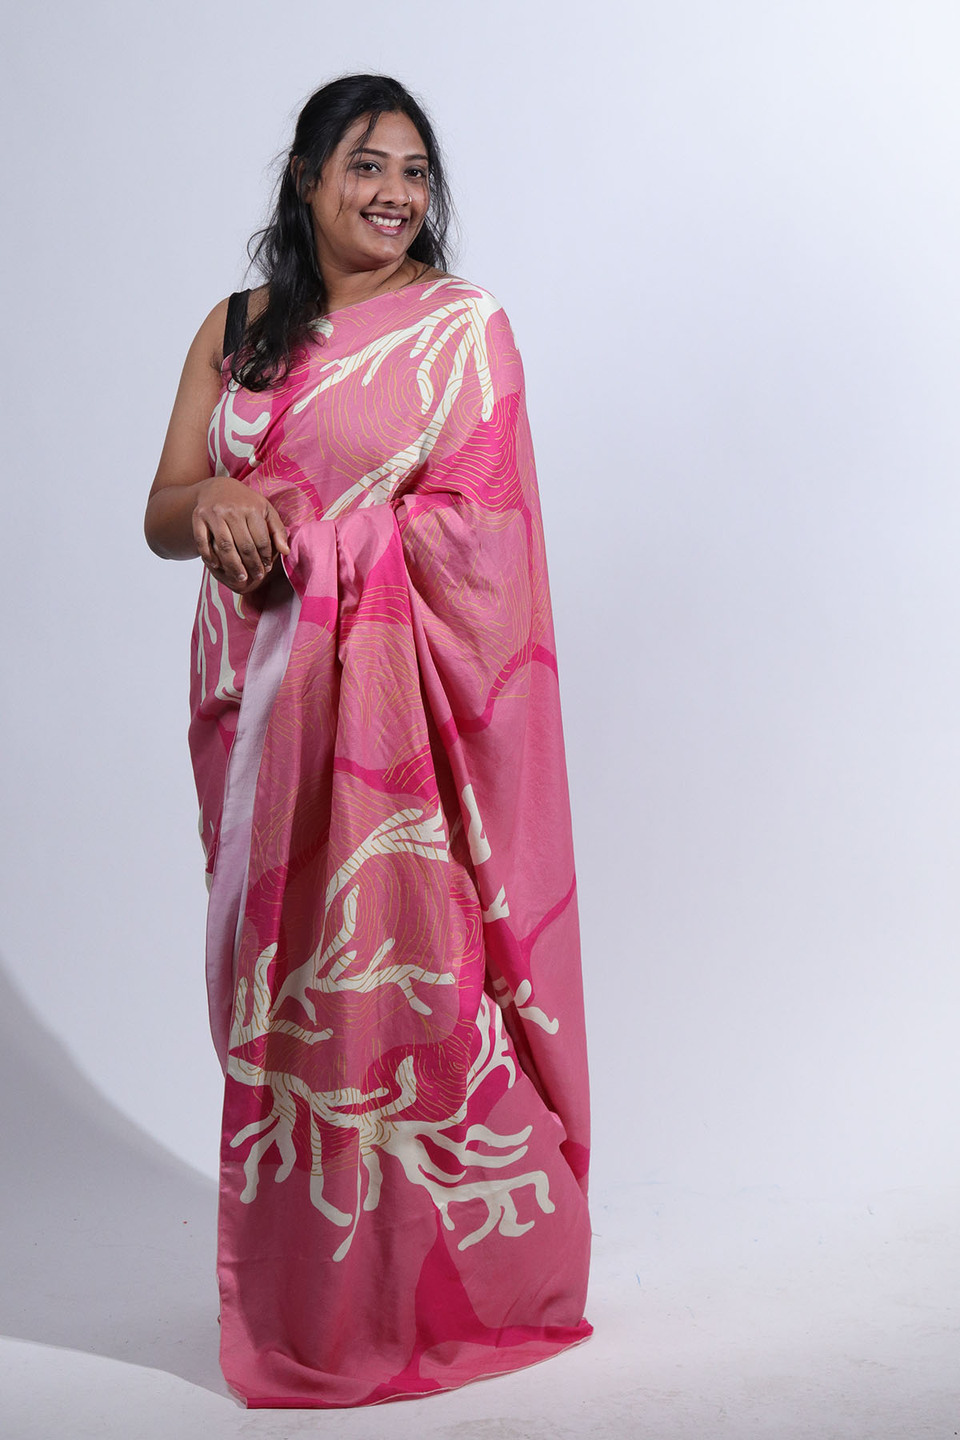 Woman wearing pink sari from the collection 'Revive' by Anula Narasimhan